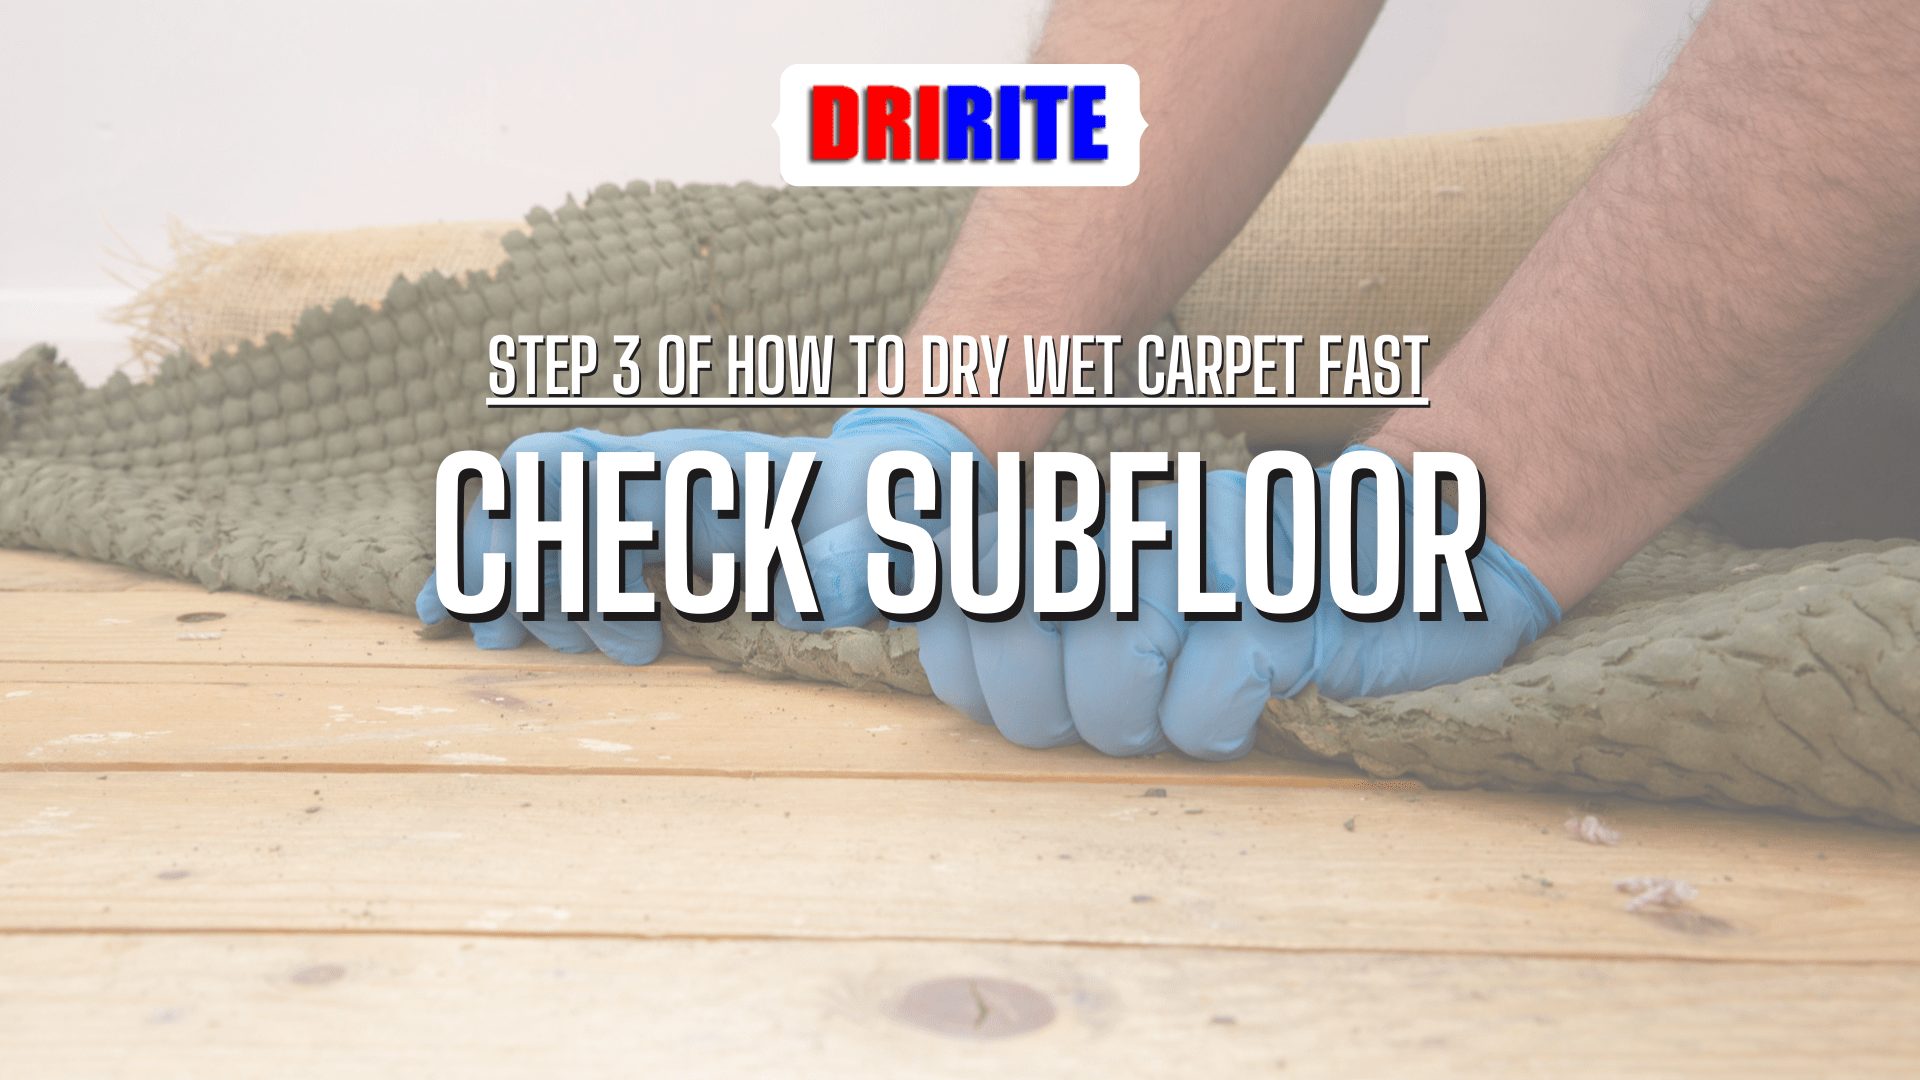 Check Subfloor - How To Dry Wet Carpet Fast After Water Damage